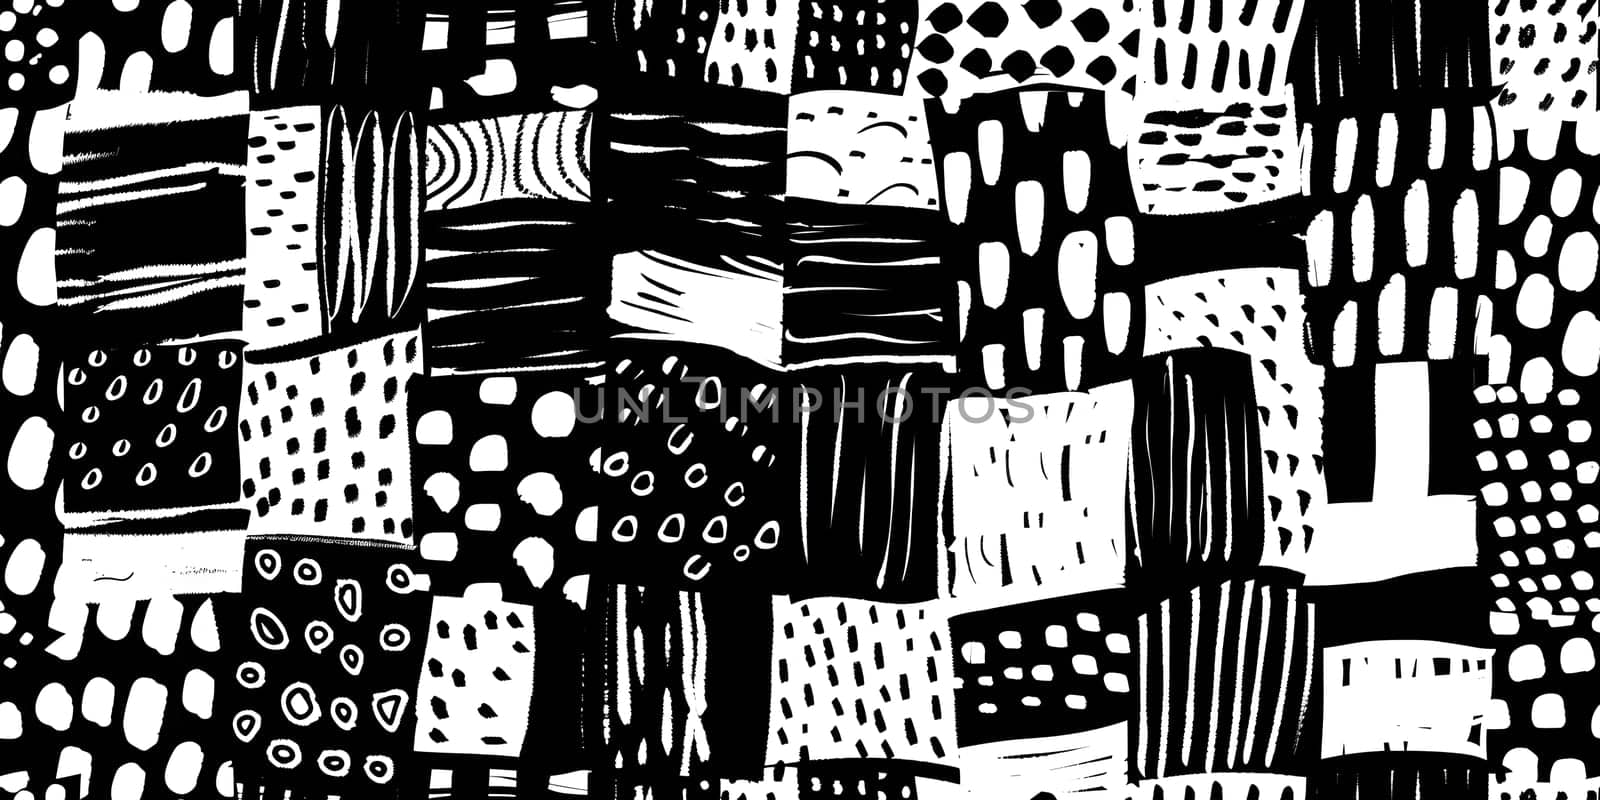 A stylish blackandwhite seamless pattern featuring dots and lines on a black background. The product is a modern art design with a geometric style, using rectangles and various material properties